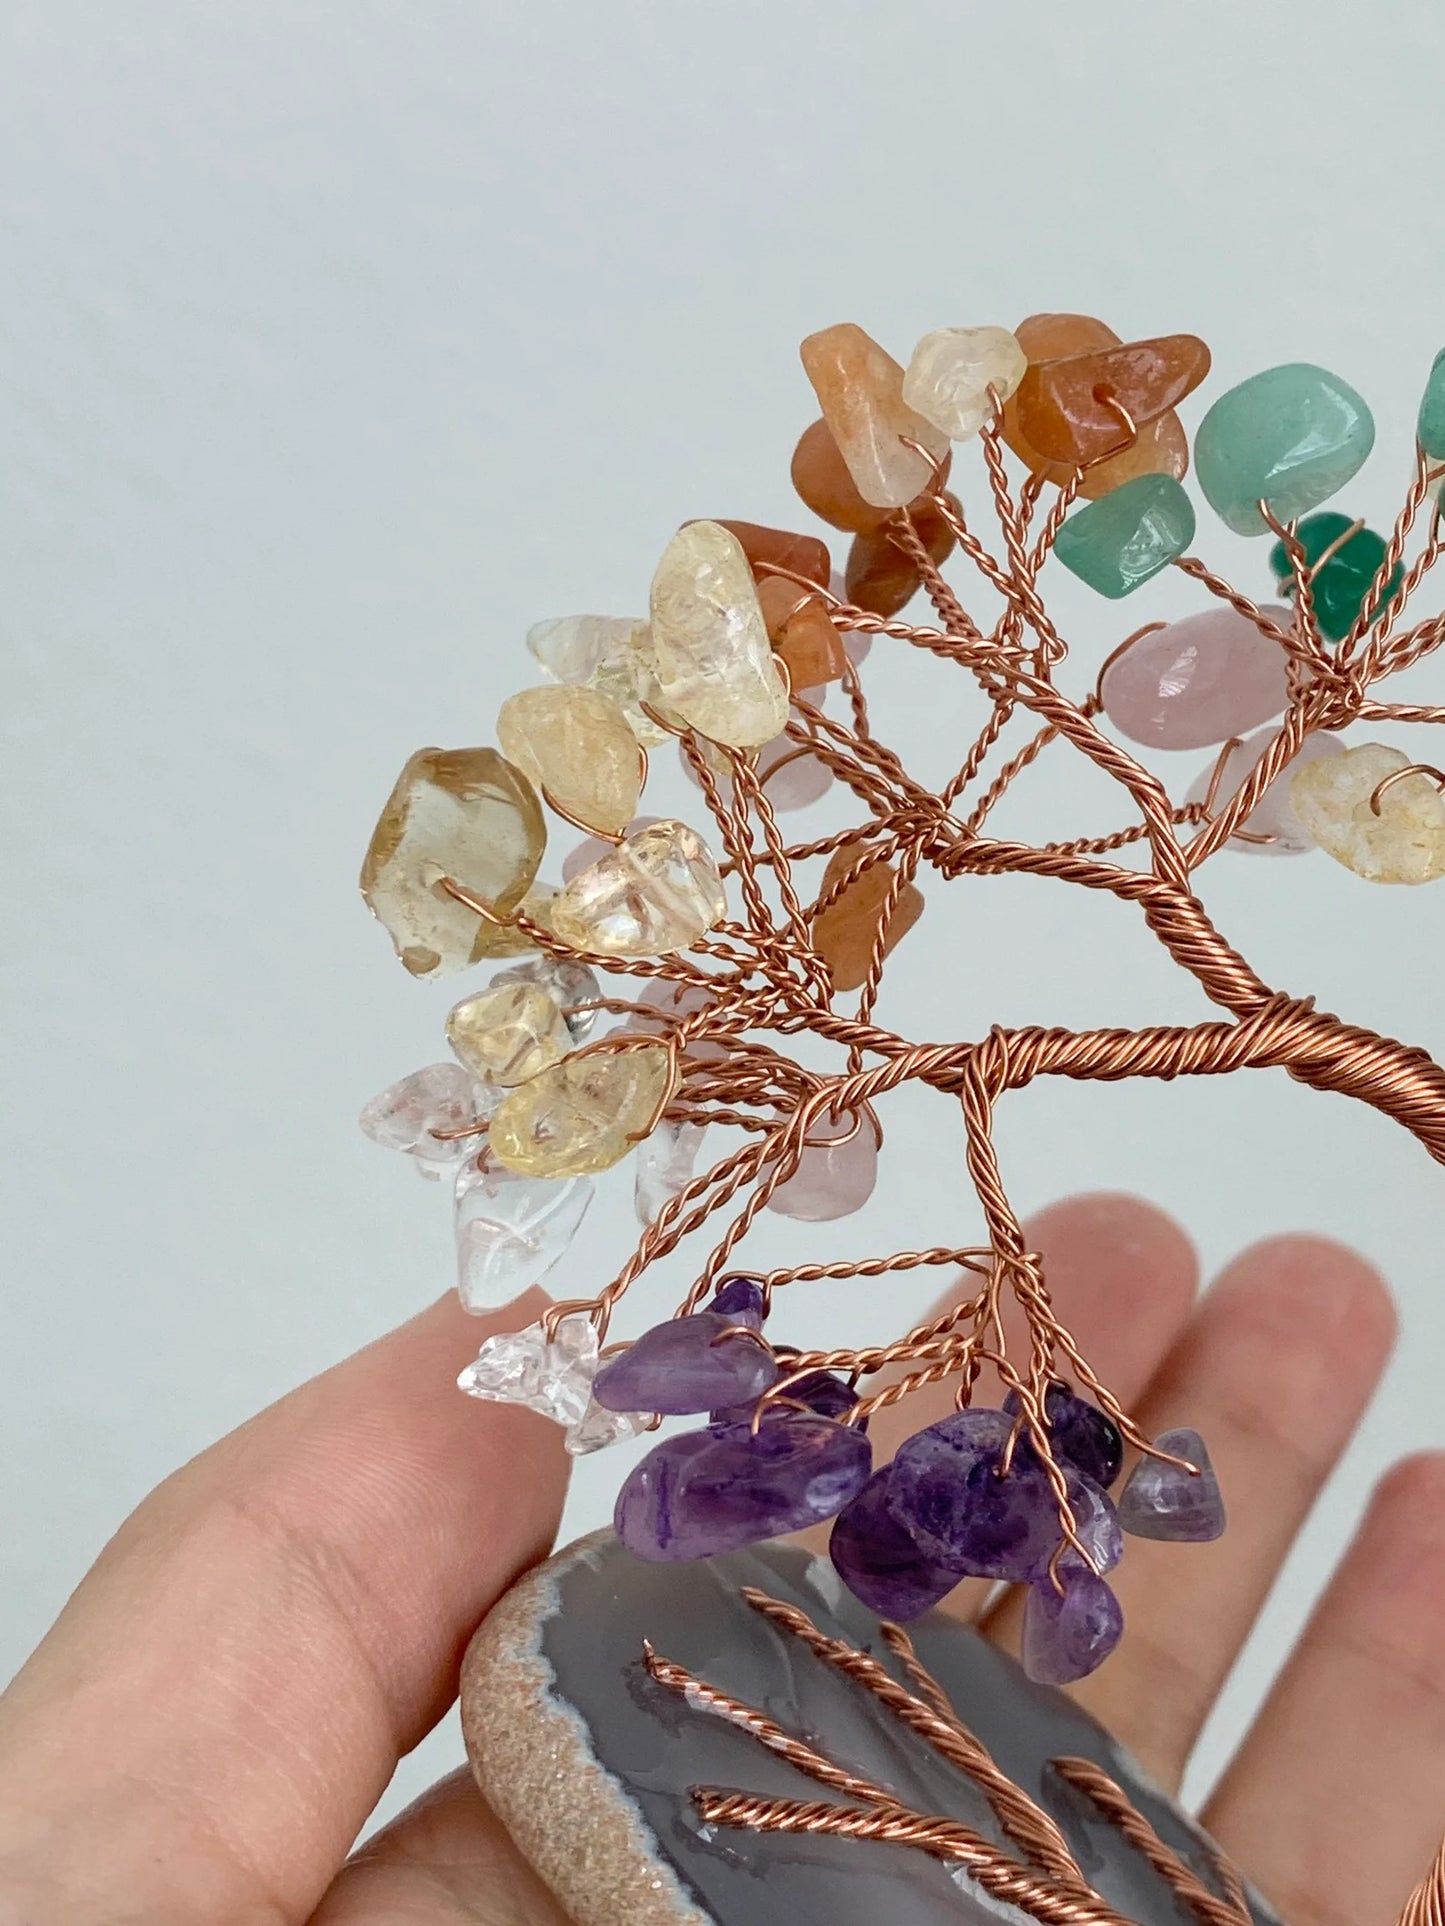 Natural Colorful Crystal Money Tree Agate Slice Base Feng Shui Crystal Tree for Wealth Luck Bonsai Chakra Healing Gemstone Tree Wire Sculpture Tree